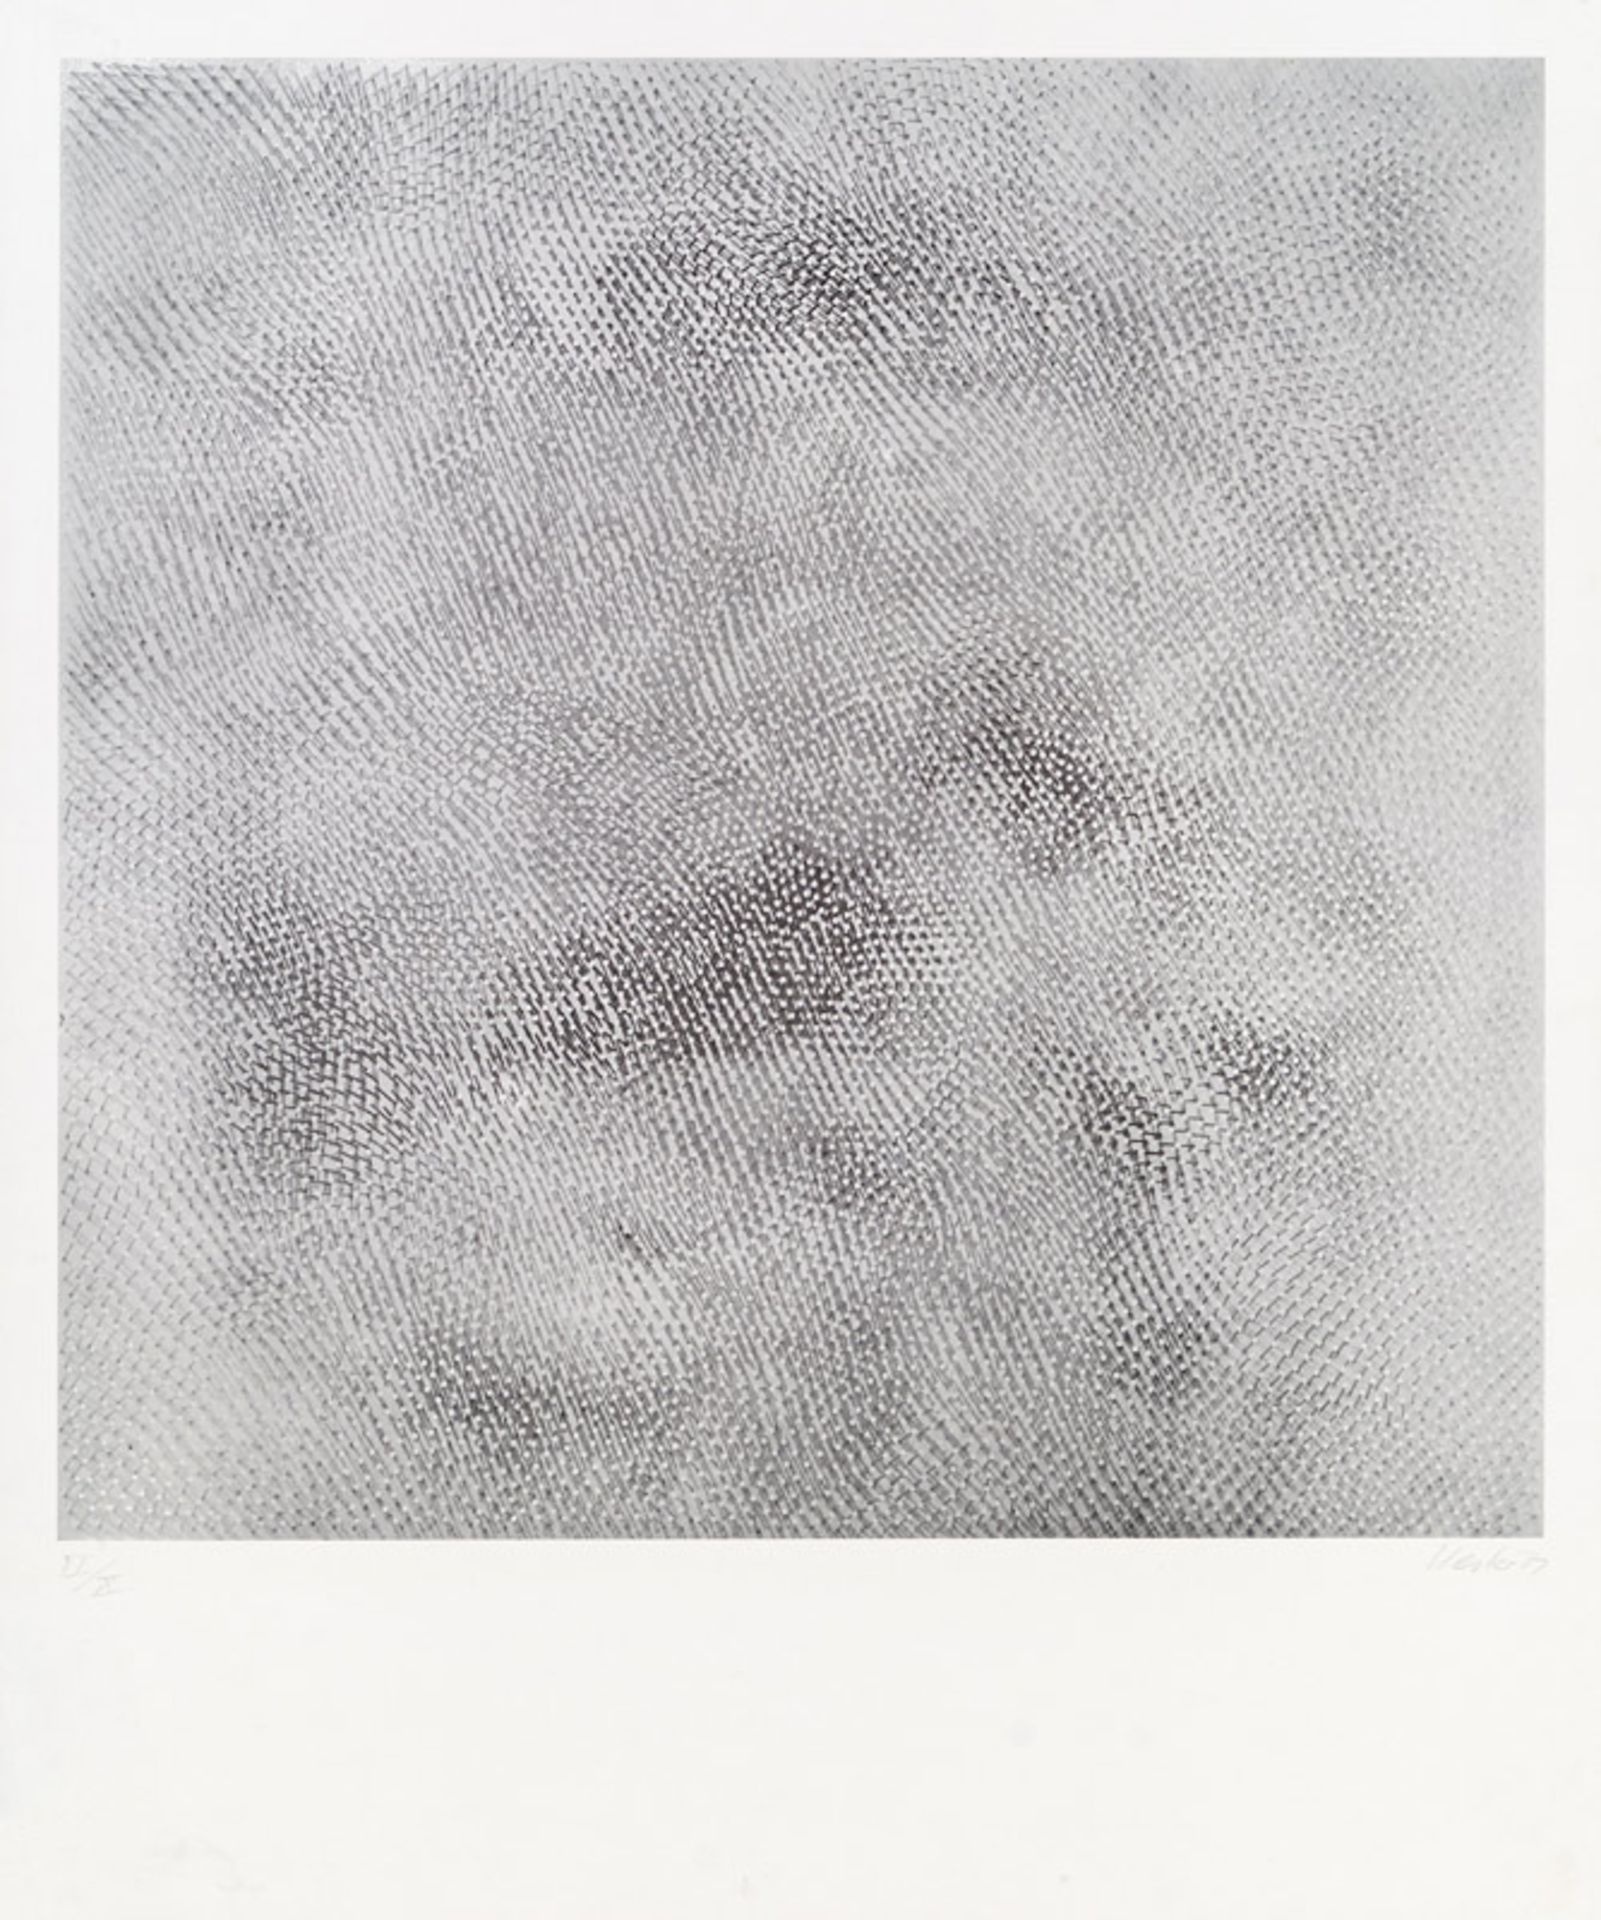 Günther Uecker *Untitled, 1971 screen print with embossing; edition VI/X; unframed; sheet size: 60×